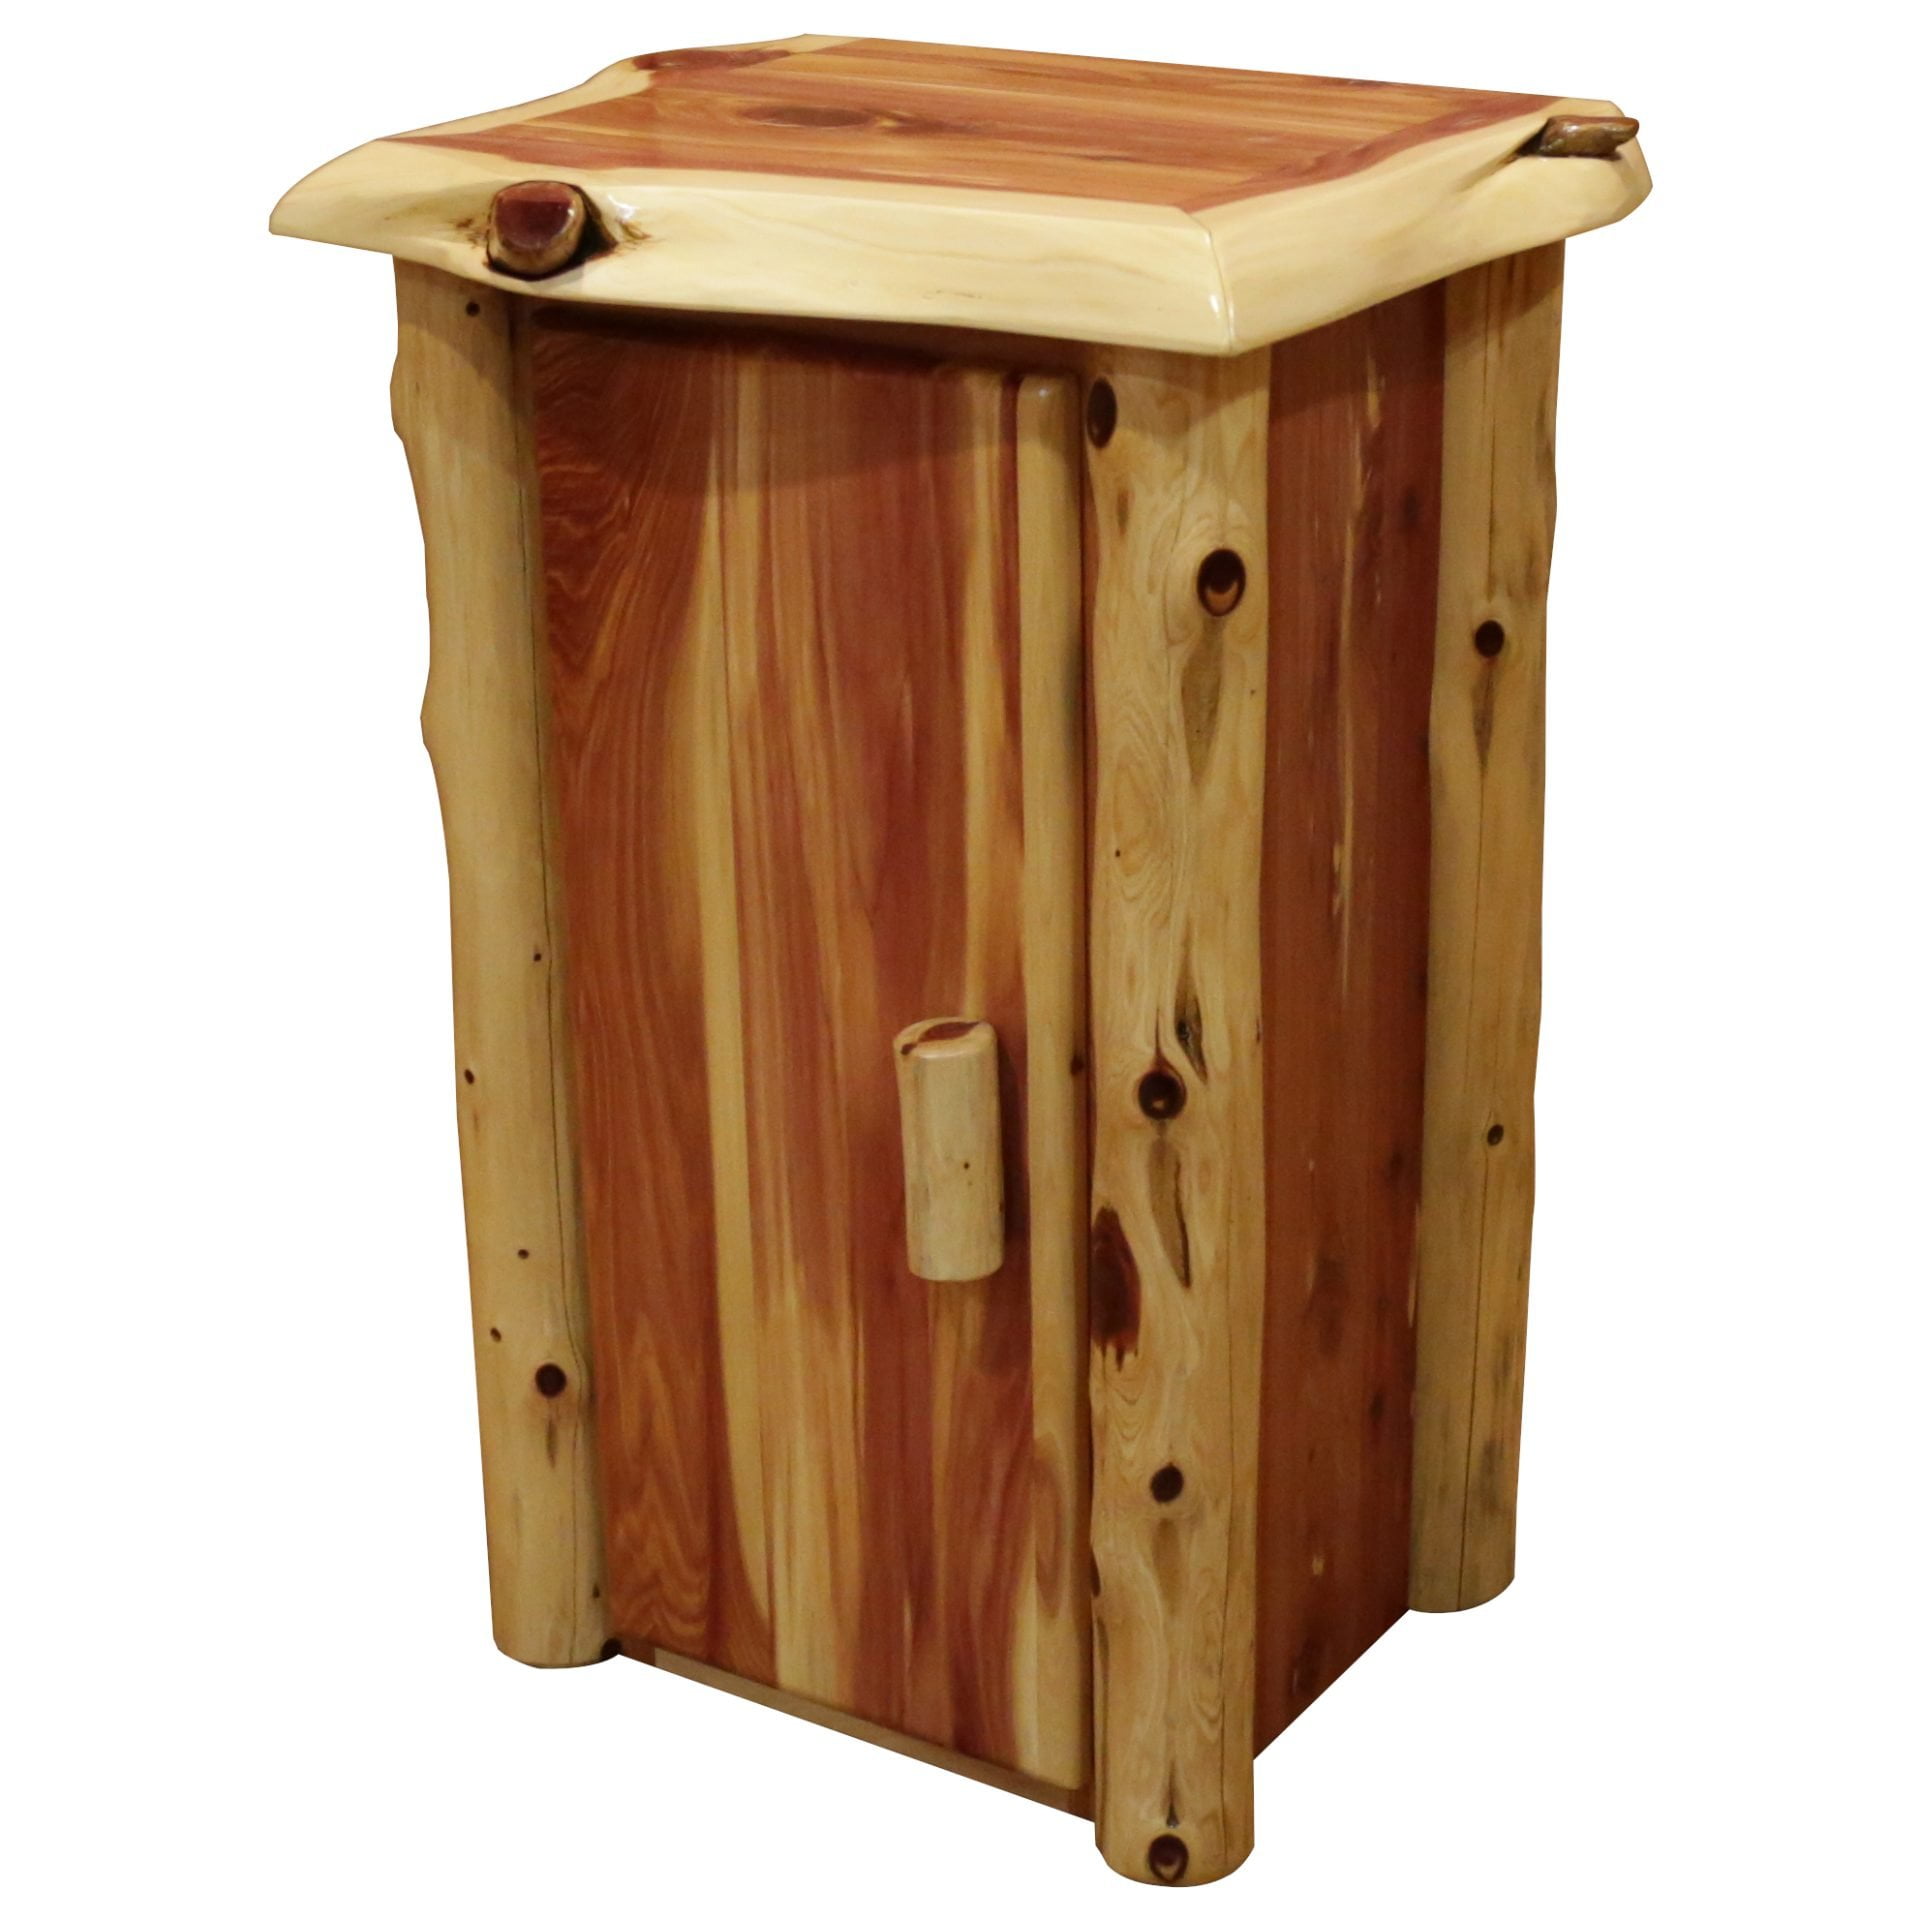 Rustic Red Cedar Log Small End Table with Door